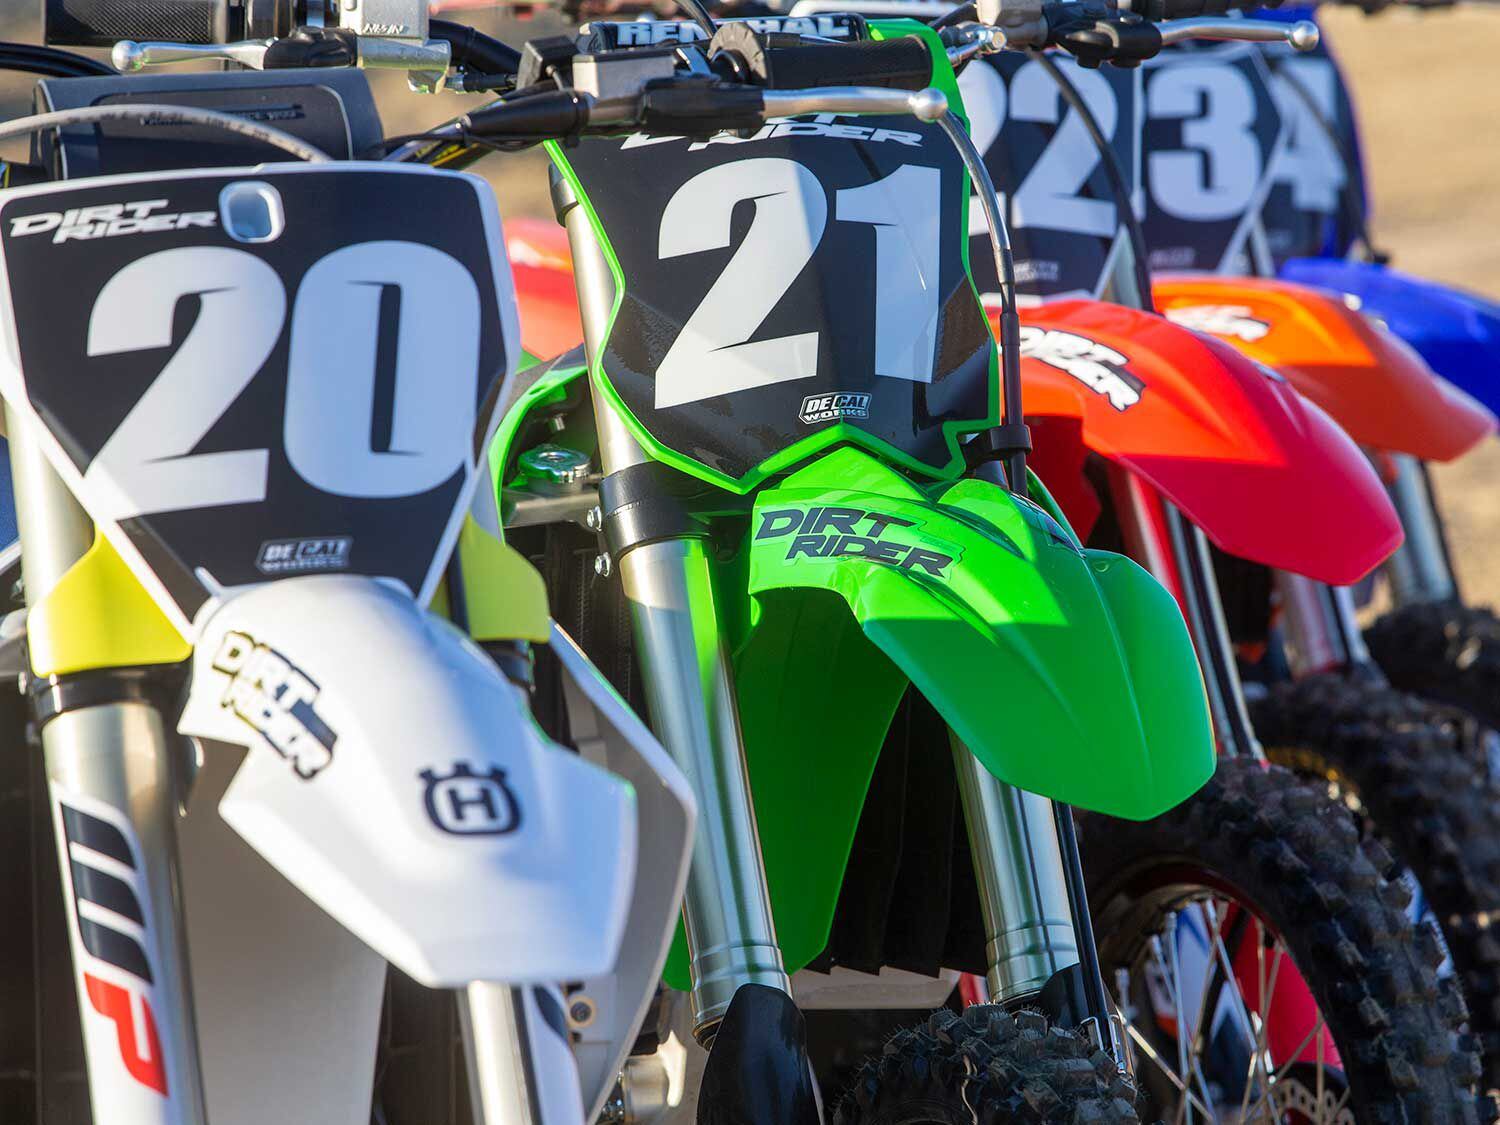 Each machine in the 250 four-stroke motocross bike comparison test was adorned with DeCal Works preprinted number plate backgrounds and arched front fender stickers.